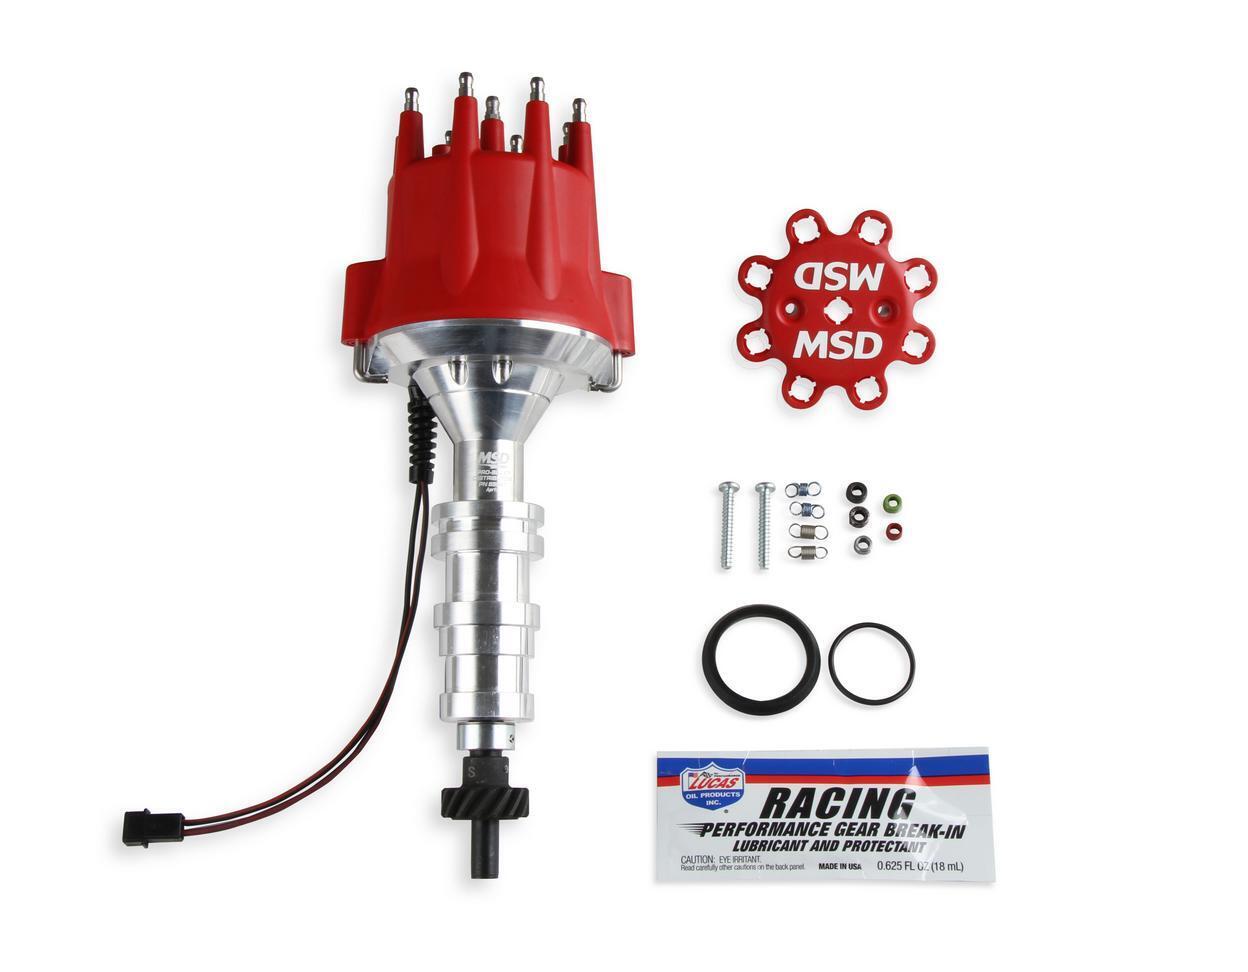 MSD Distributor Fits Ford FE, Steel Gear Ignition Distributor